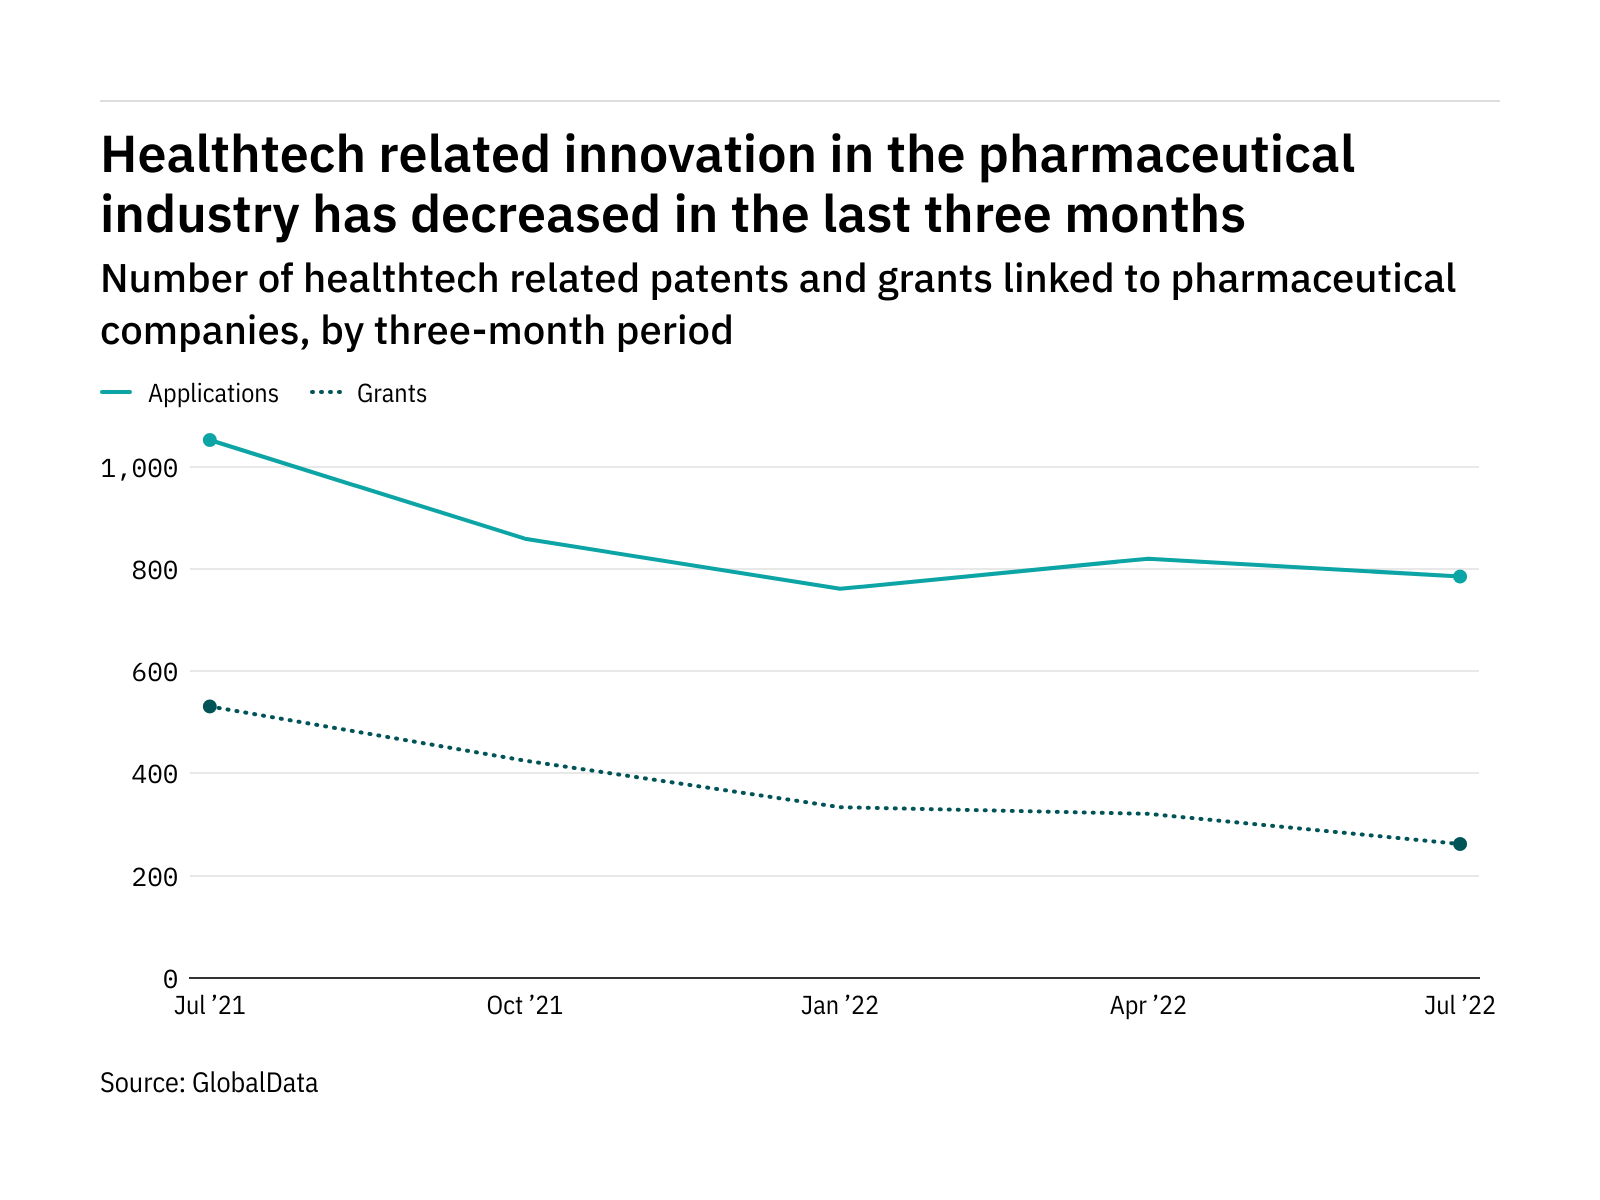 Healthtech innovation among pharmaceutical industry companies has dropped off in the last three months